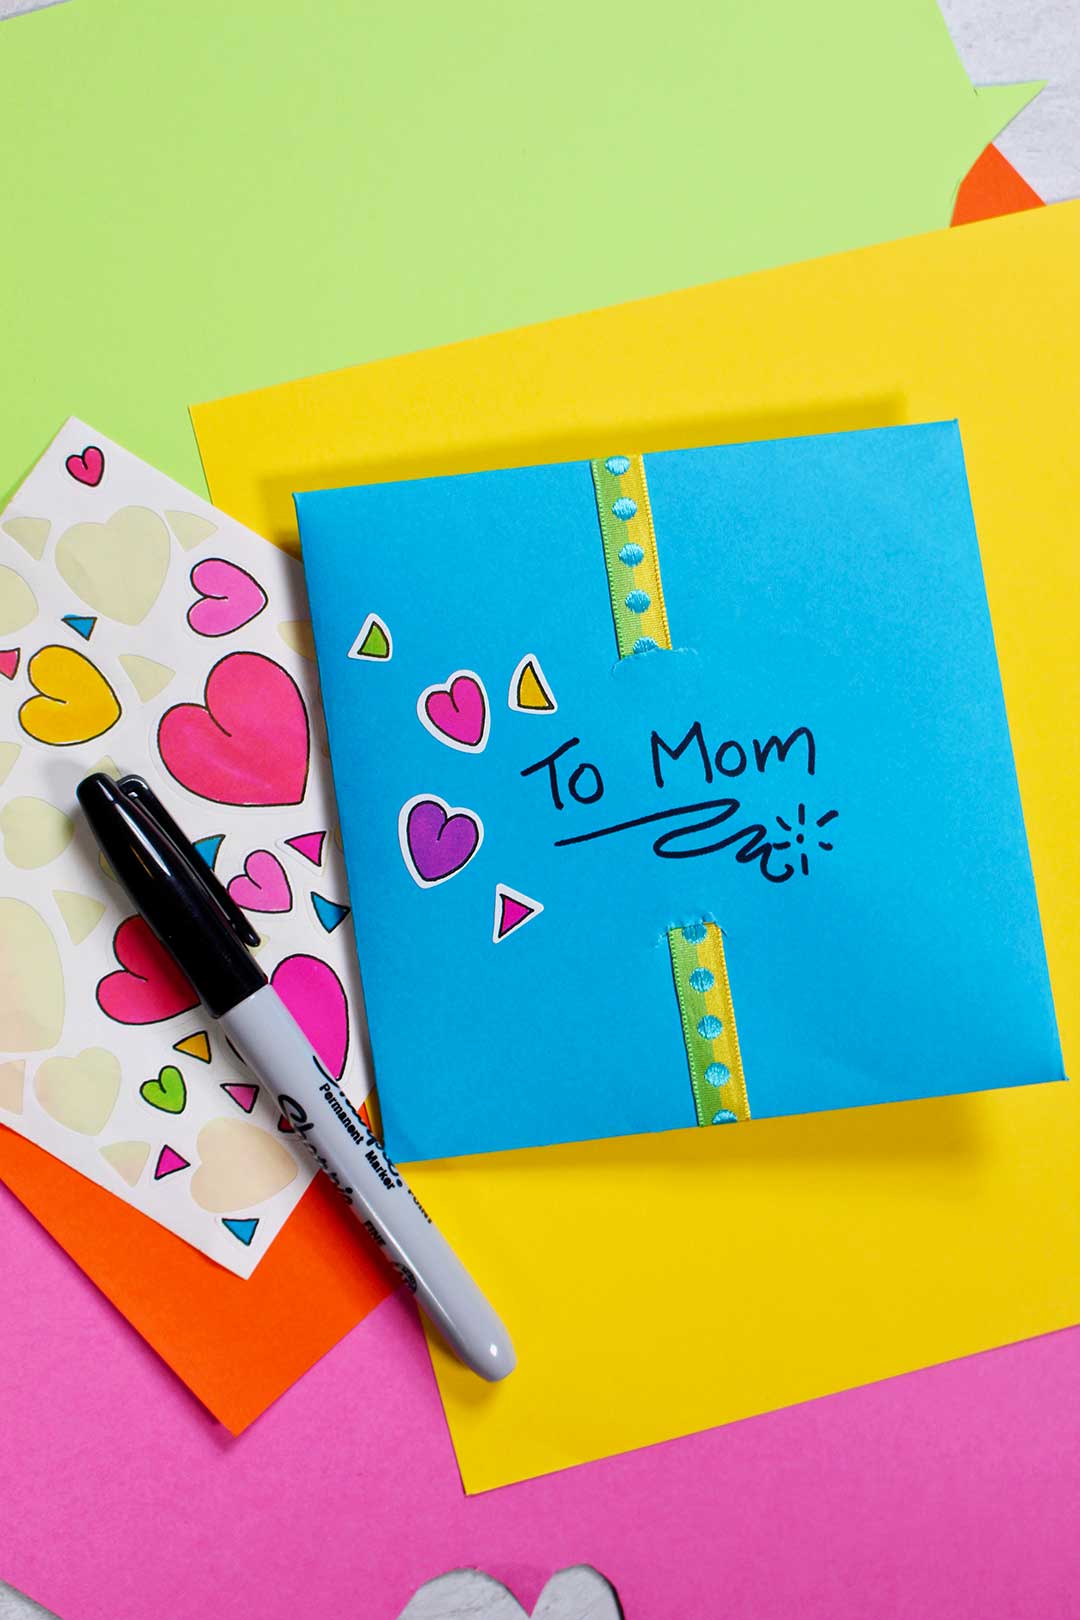 A homemade blue envelope with heart stickers addressed to Mom, ontop a pile of colorful paper.